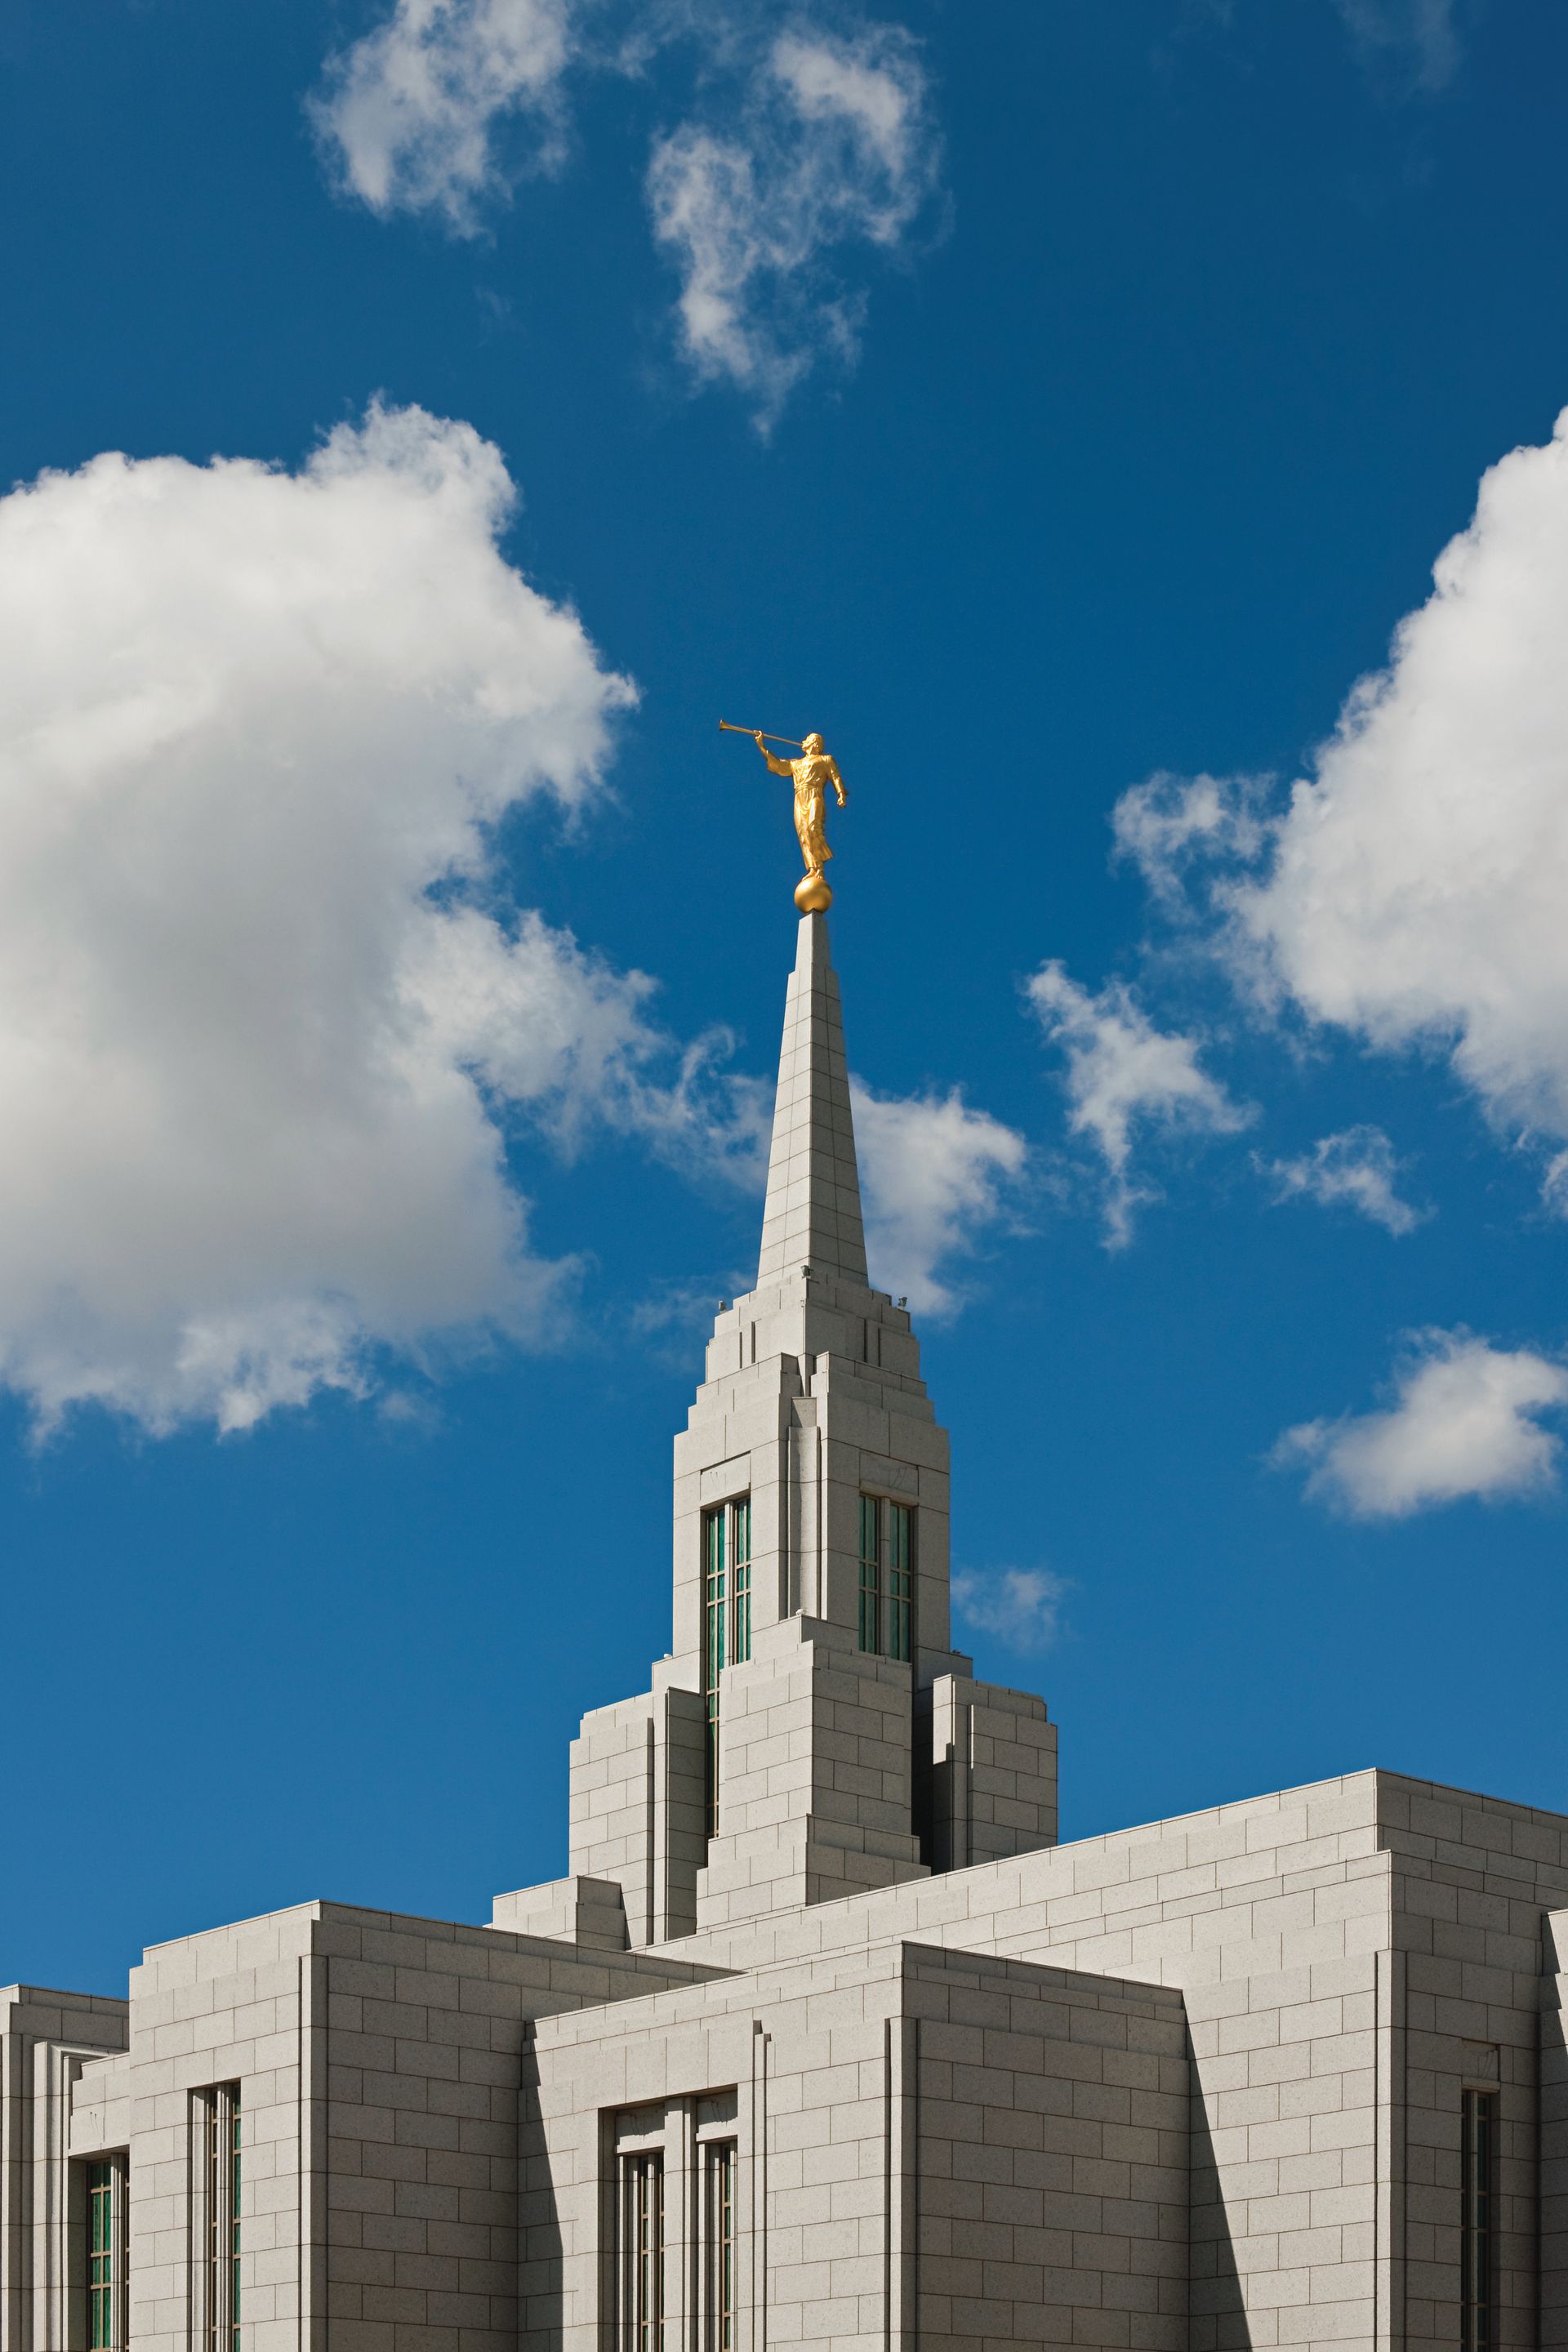 The Cebu City Philippines Temple has one spire with the angel Moroni on top.